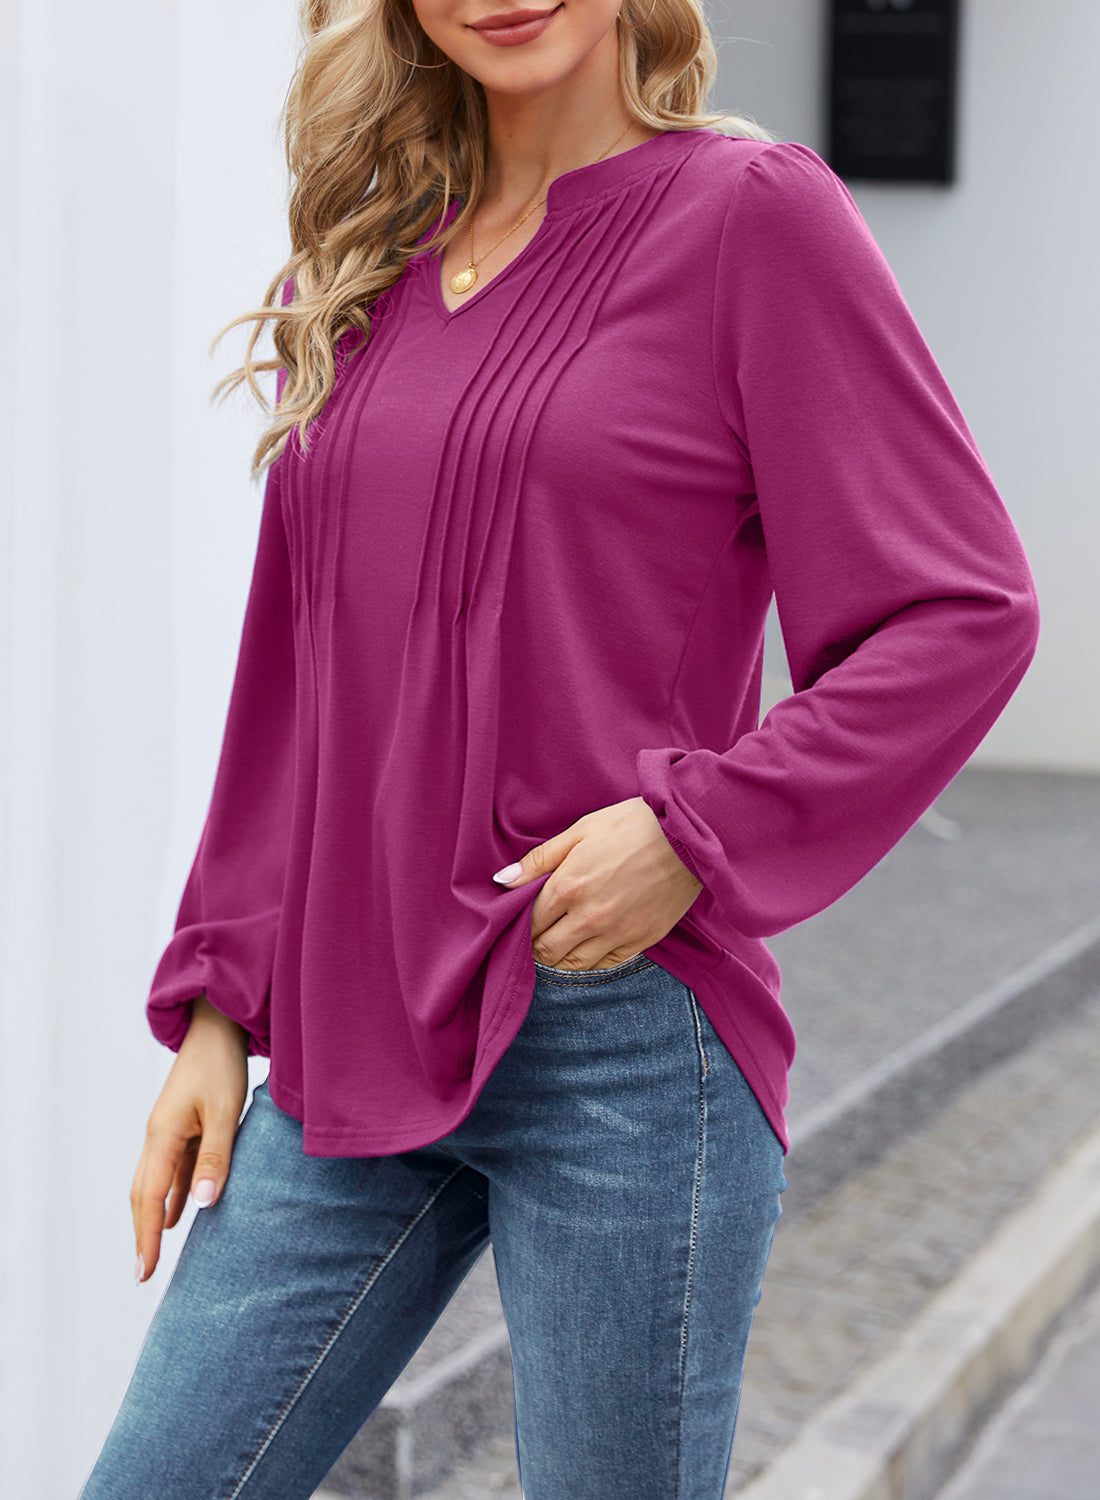 MIHOLL Women's V Neck Puff Long Sleeve T Shirts Pleated Casual Loose Tunic Blouse